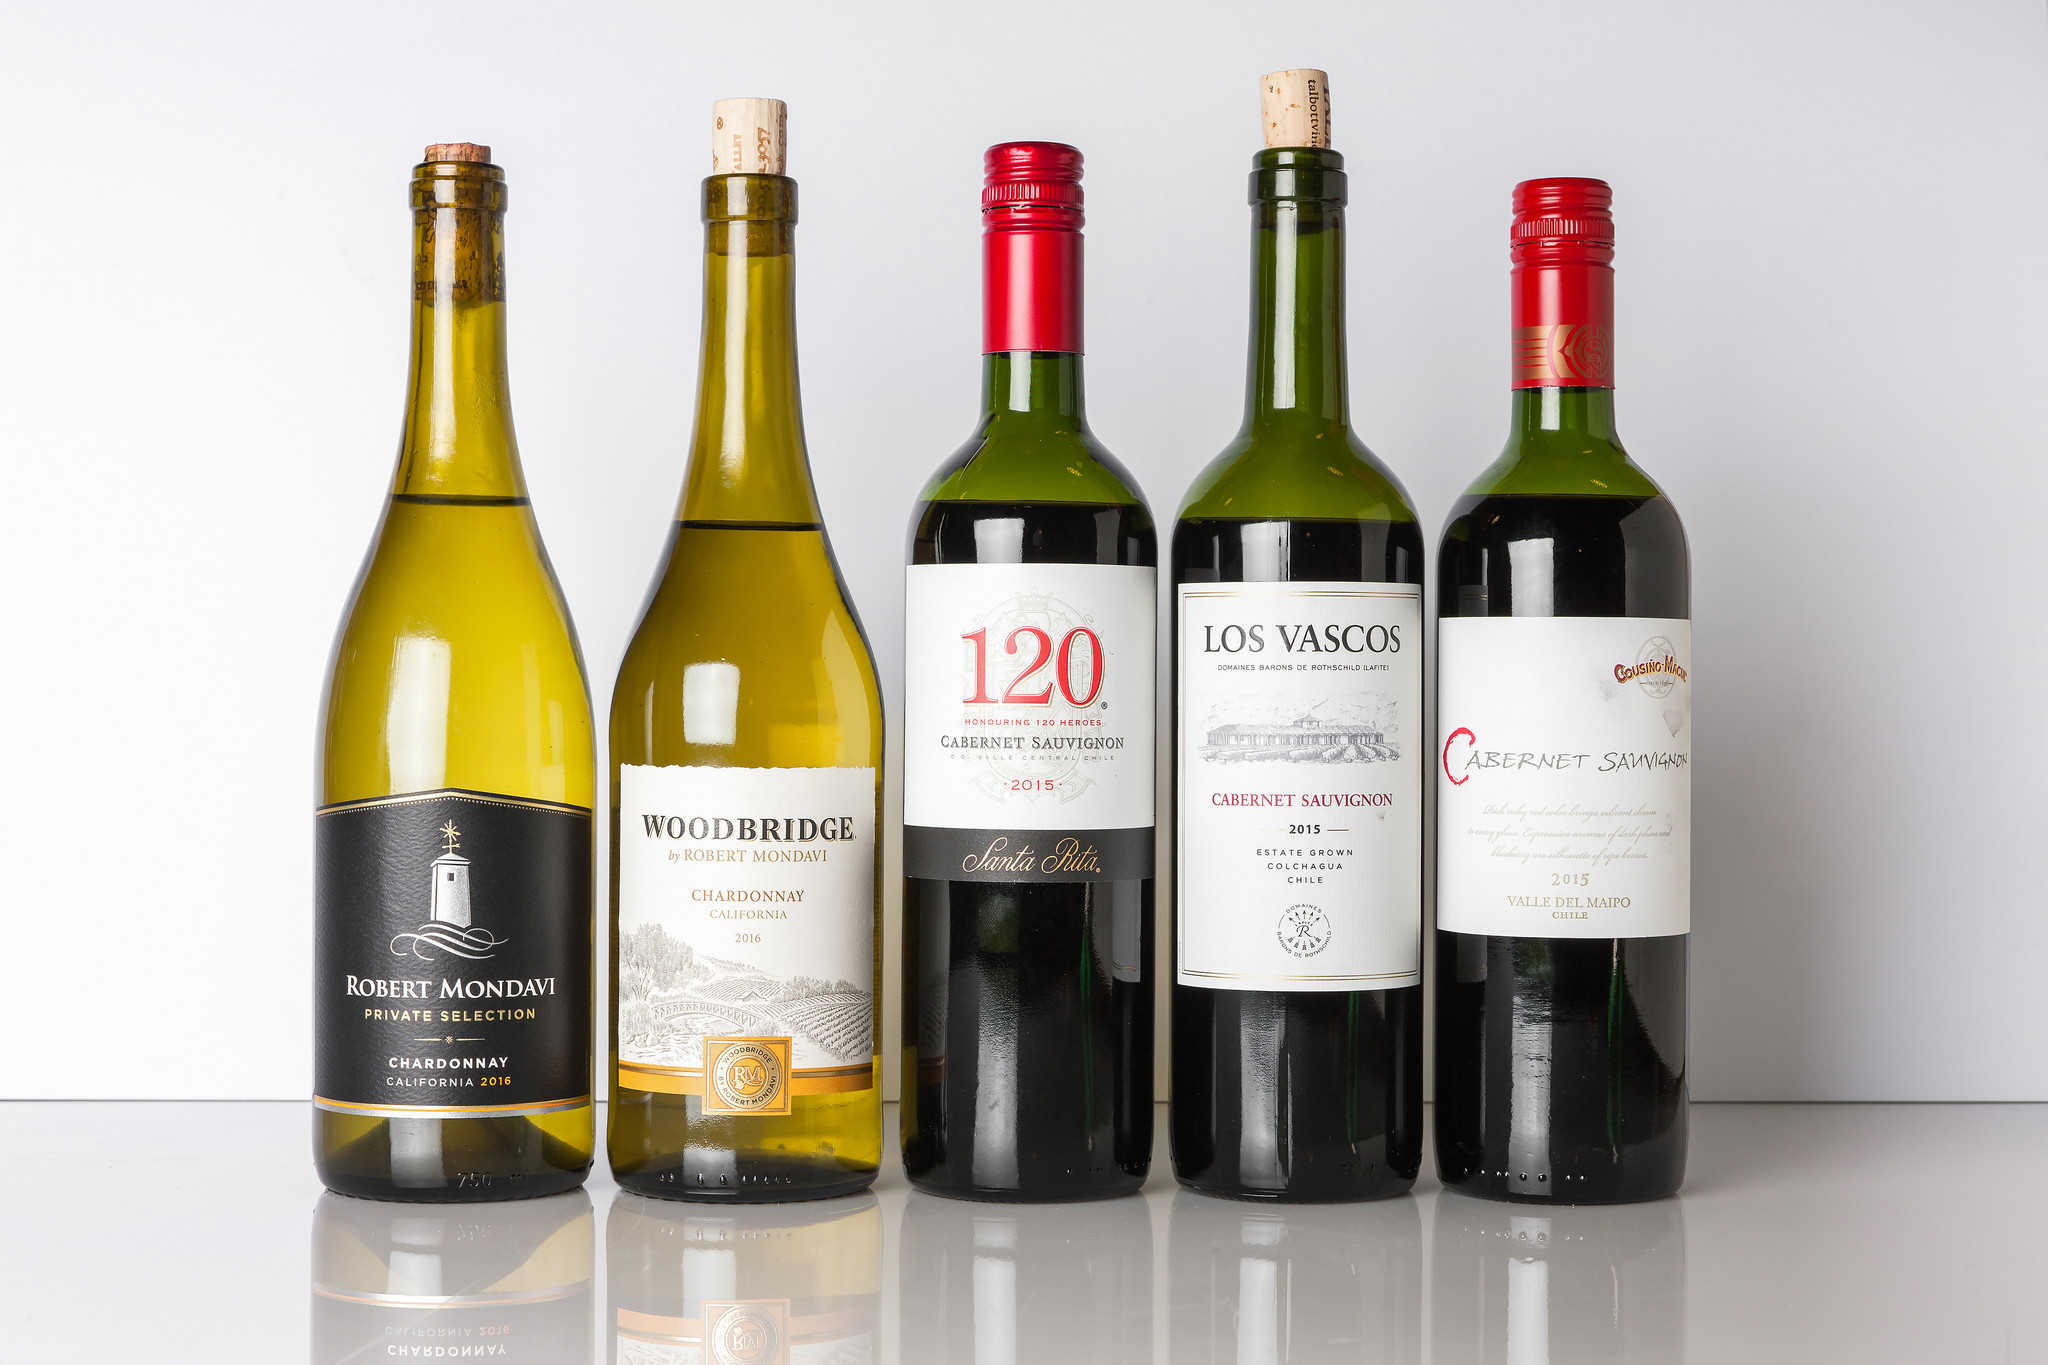 These wines are cheap and available everywhere. But are any worth